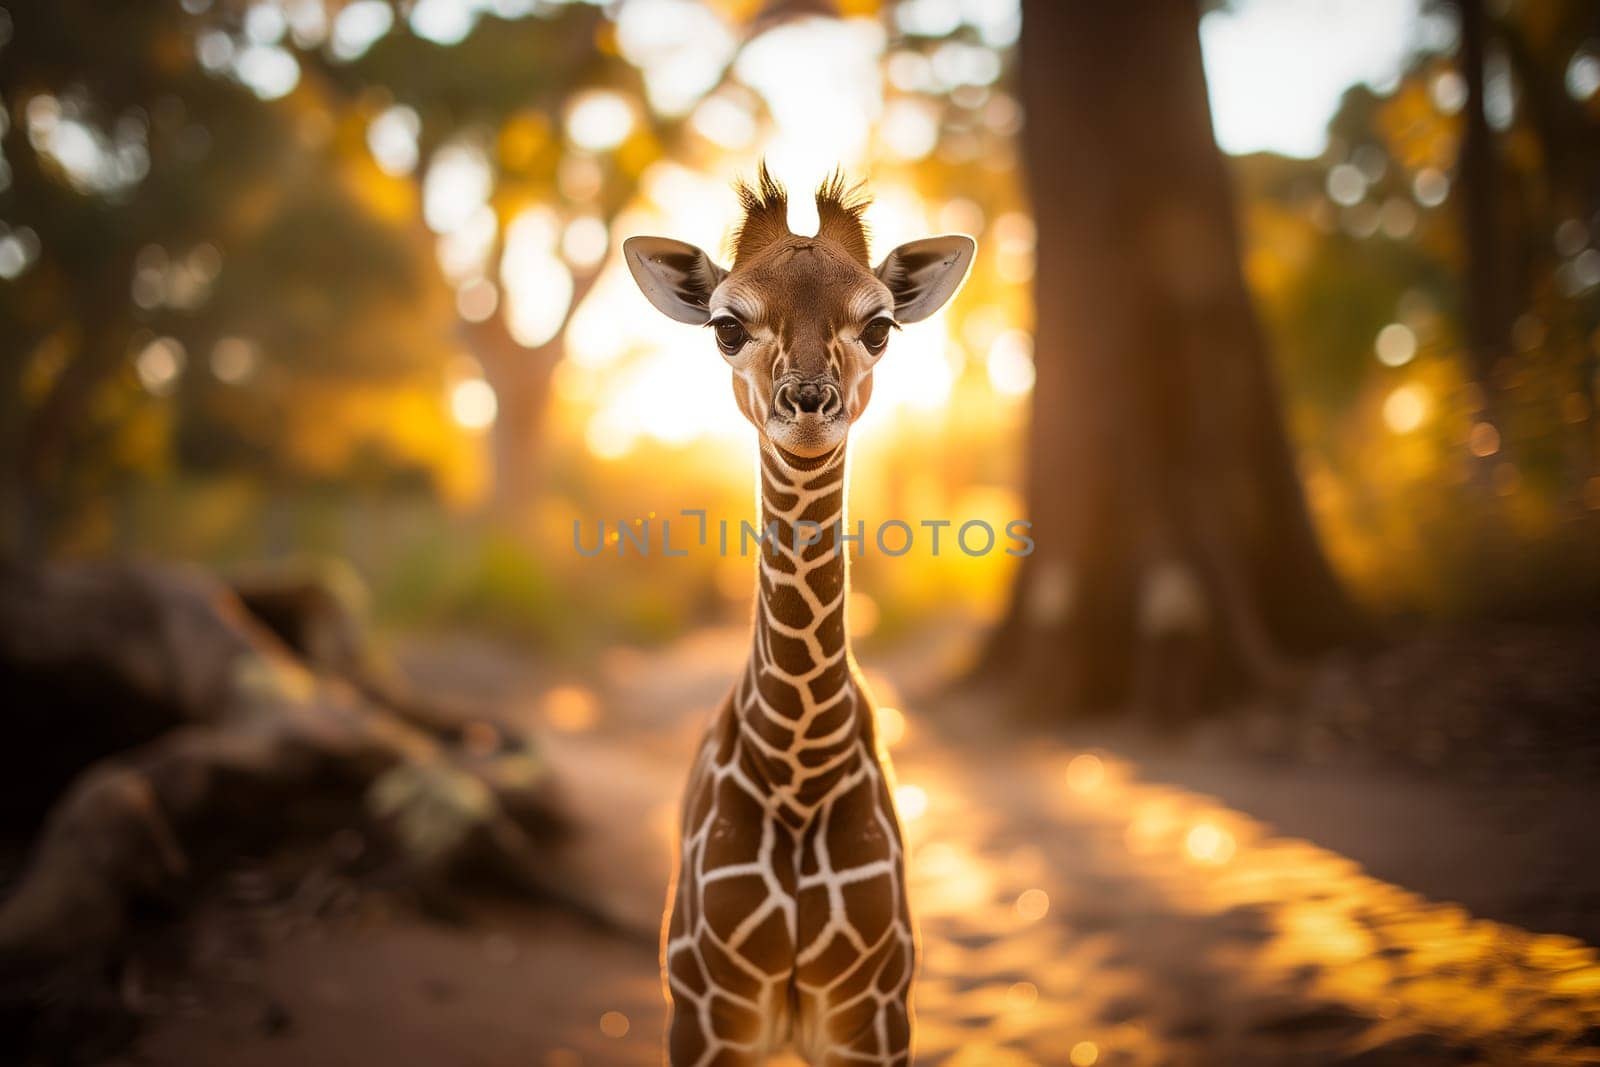 Baby giraffe standing amidst the golden rays of the setting sun, surrounded by nature beauty